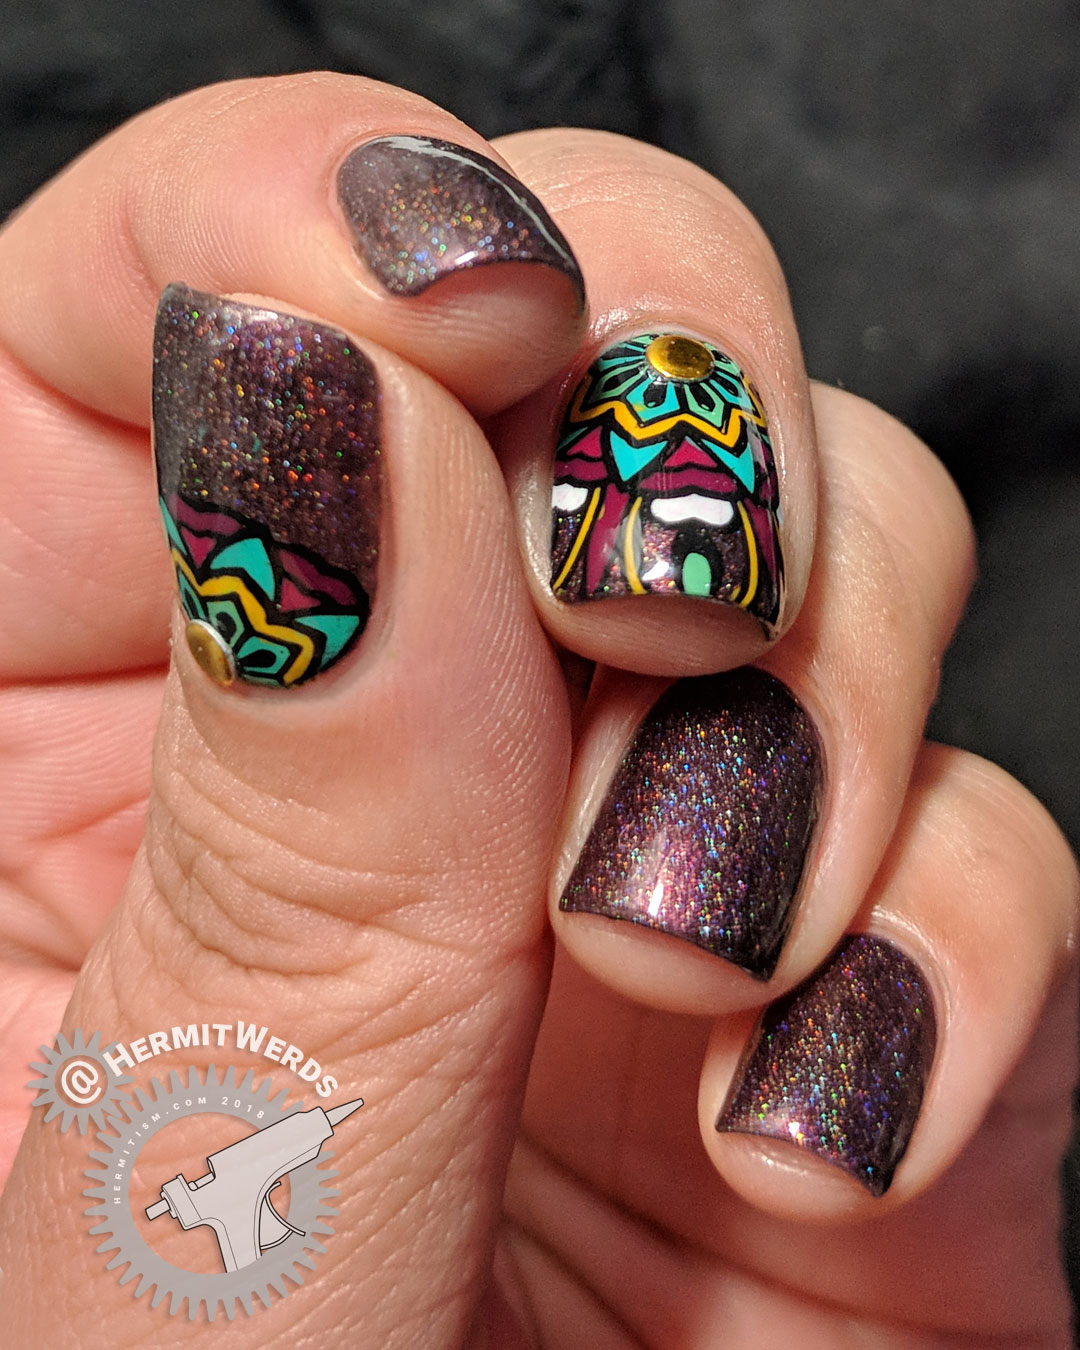 Chocolate Mandala - Hermit Werds - accent nail mandalas in mustard, green, and berry shades with brown scattered holographic nails